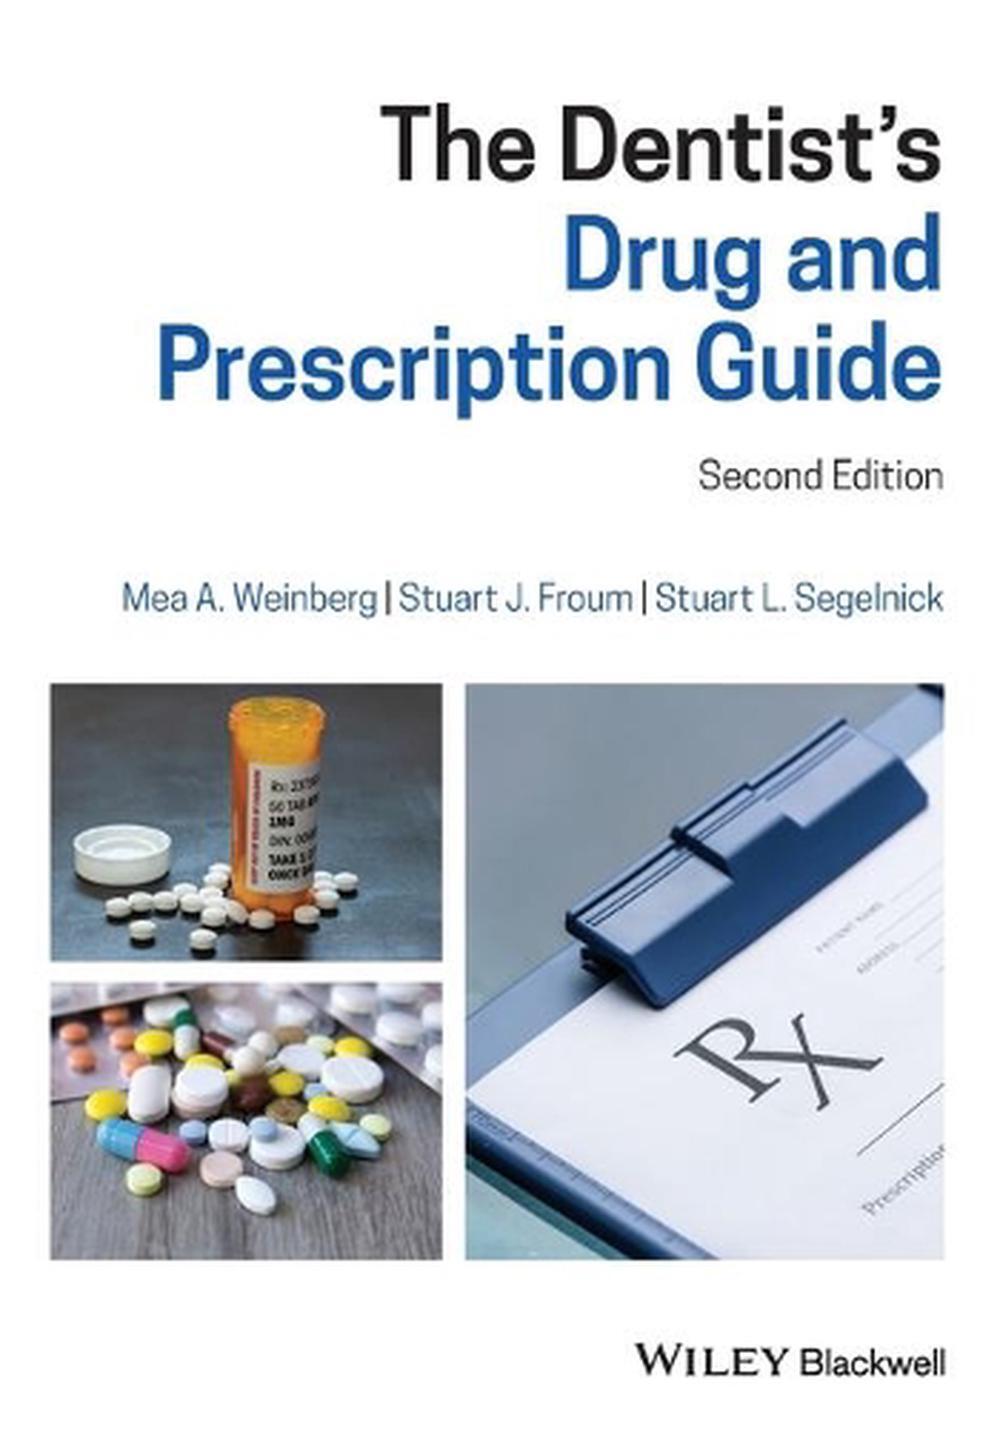 The Dentist's Drug and Prescription Guide by Mea A. Weinberg (English) Paperback